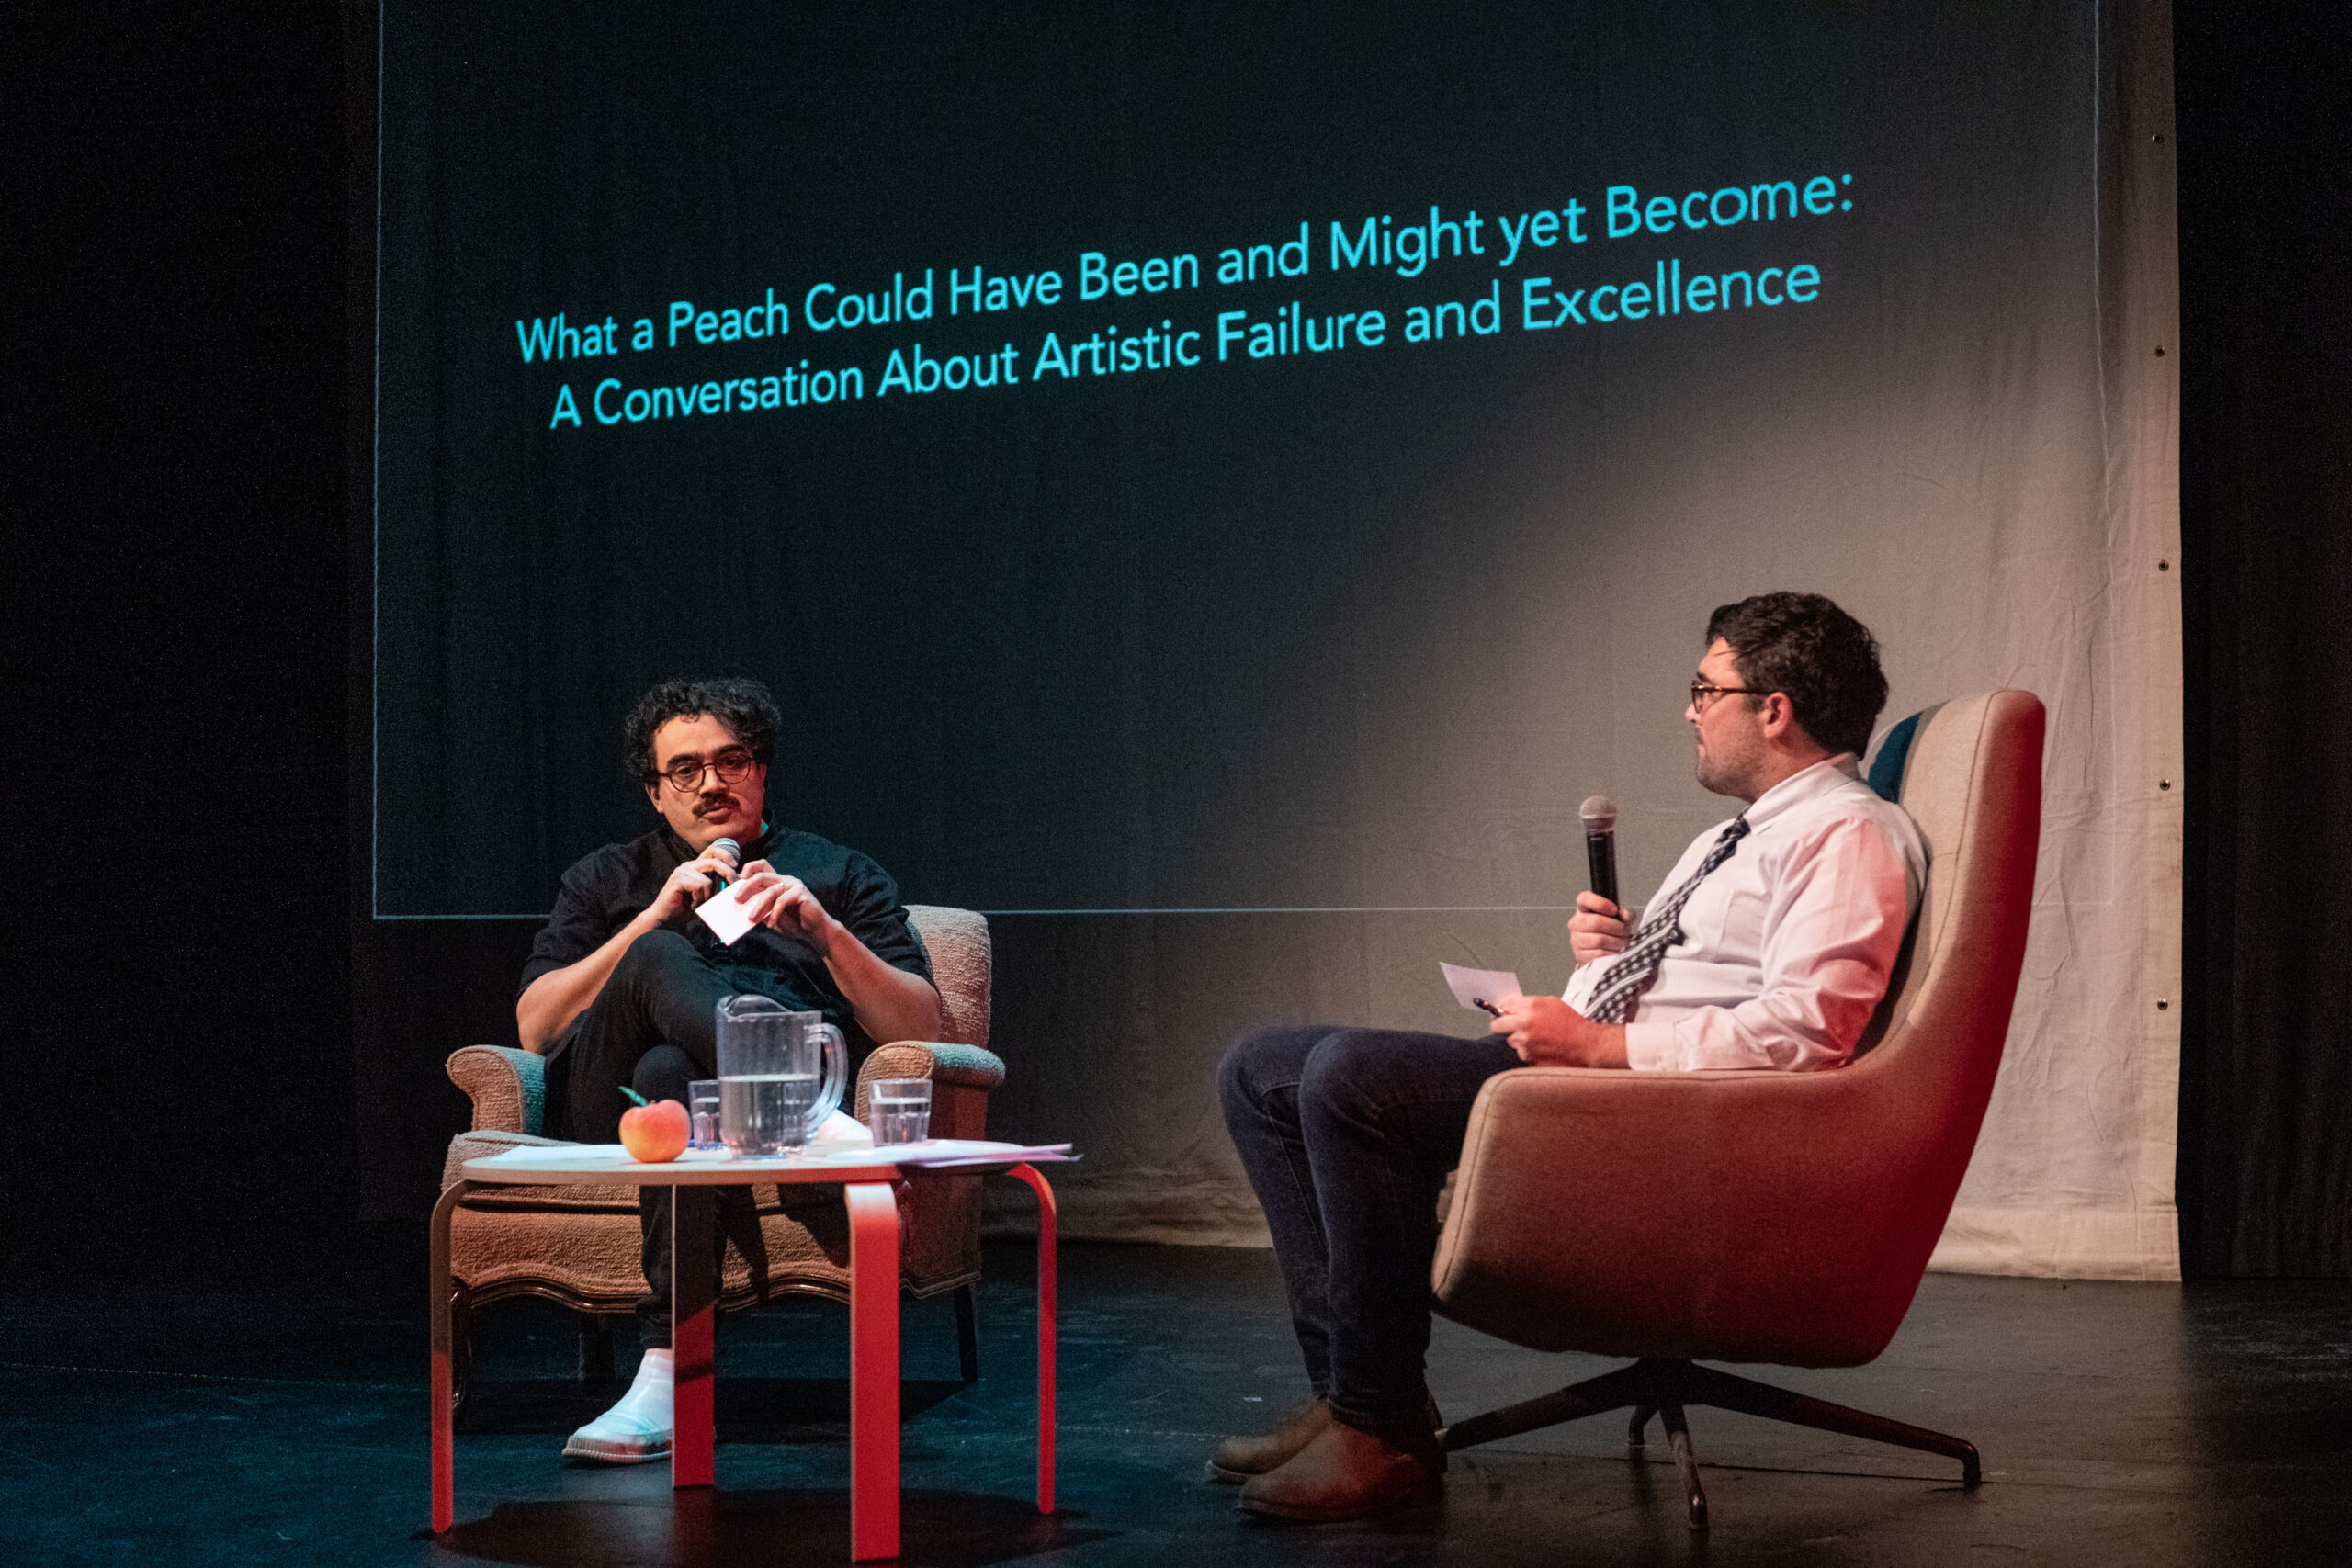 Image of Julian and Henry sitting in armchairs on stage with a table in between them. There is a jug of water, two water glasses, and a peach on the table. Both Julian and Henry speak into microphones and hold cue cards. Projected on a screen behind them is the title of their project; “What a Peach Could Have Been and Might yet Become: A Conversation About Artistic Failure and Excellence”